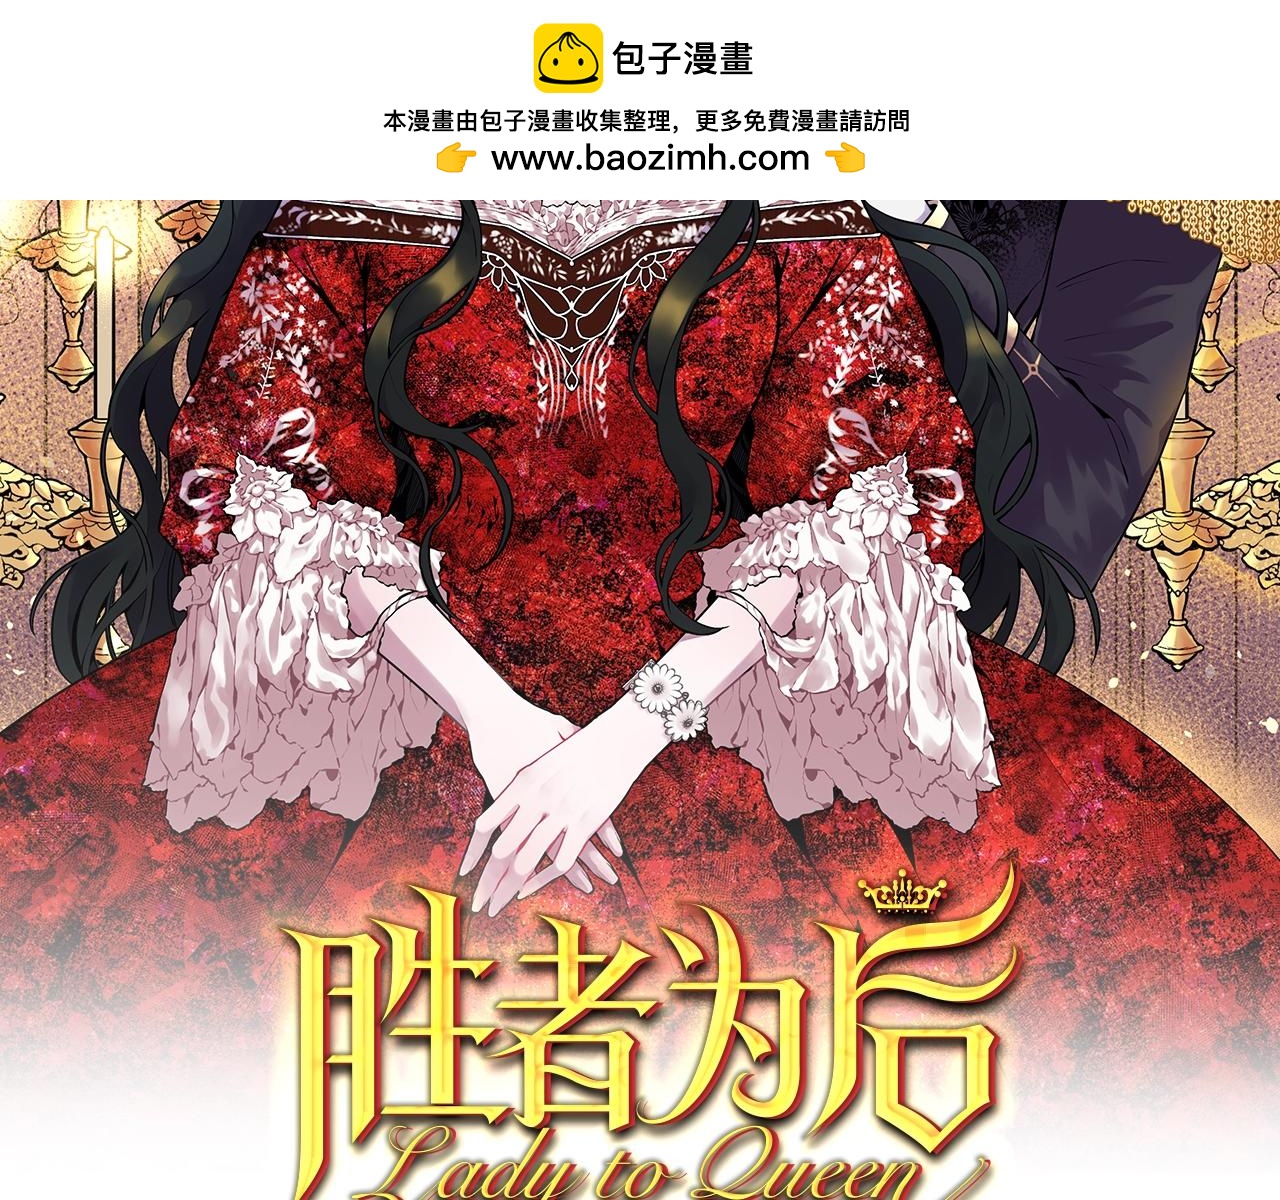 Lady to Queen-勝者爲後 - 第58話 變心(1/3) - 2